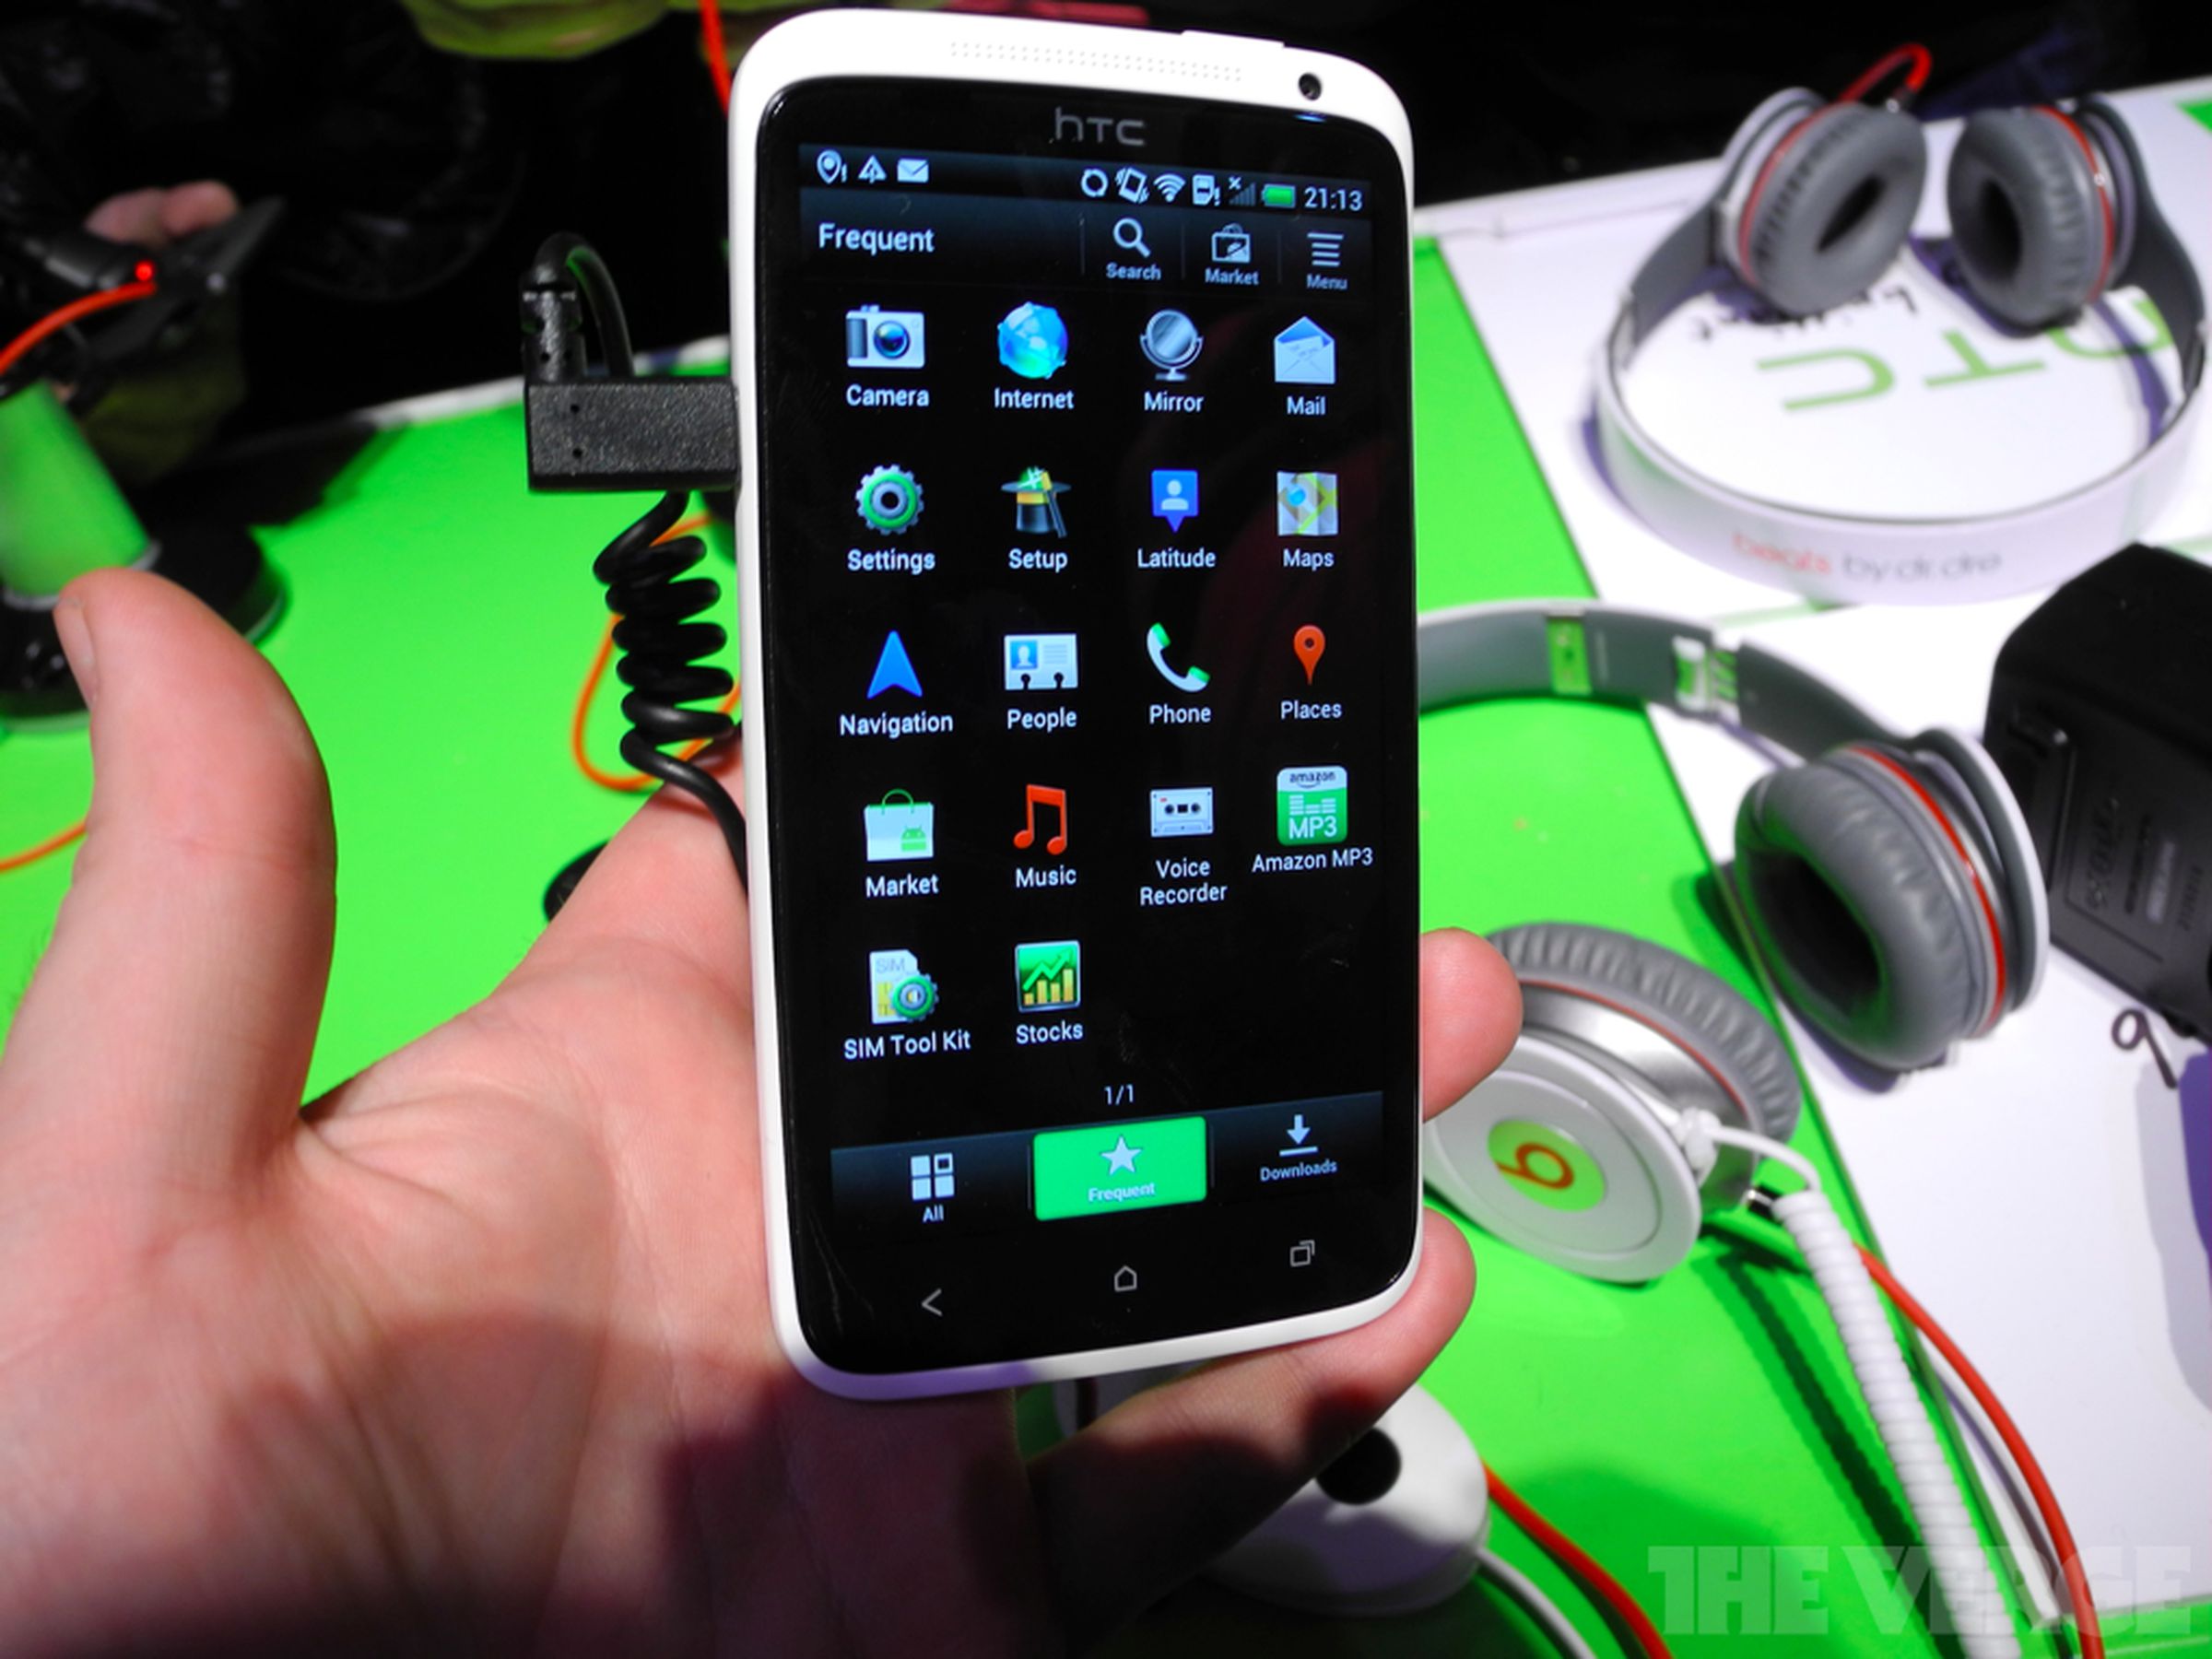 HTC One X hands-on photos